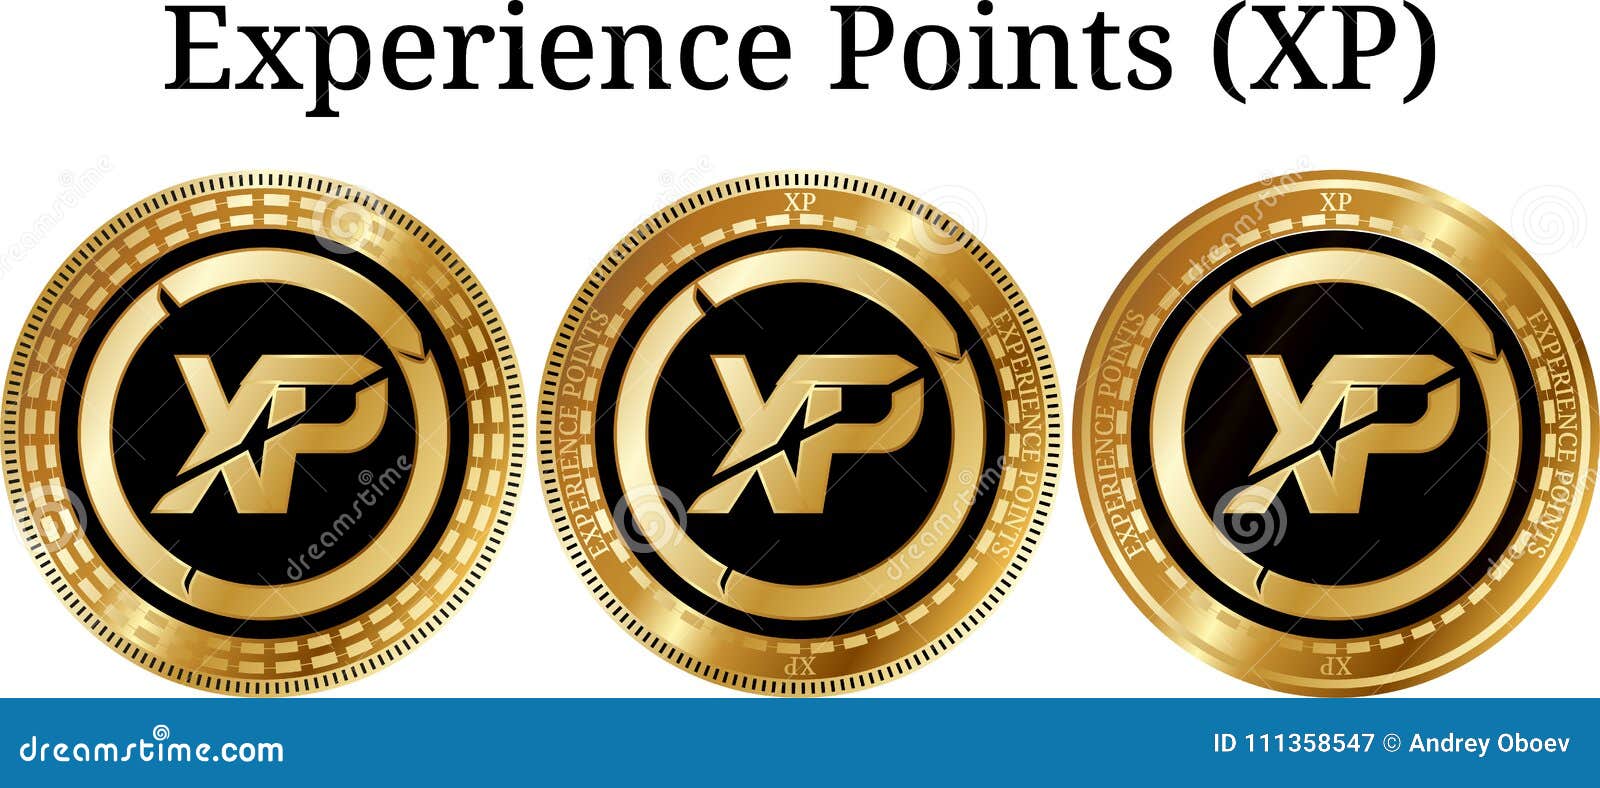 Experience points. Golden Coin шины. Experience points XP. 3 Experience points.